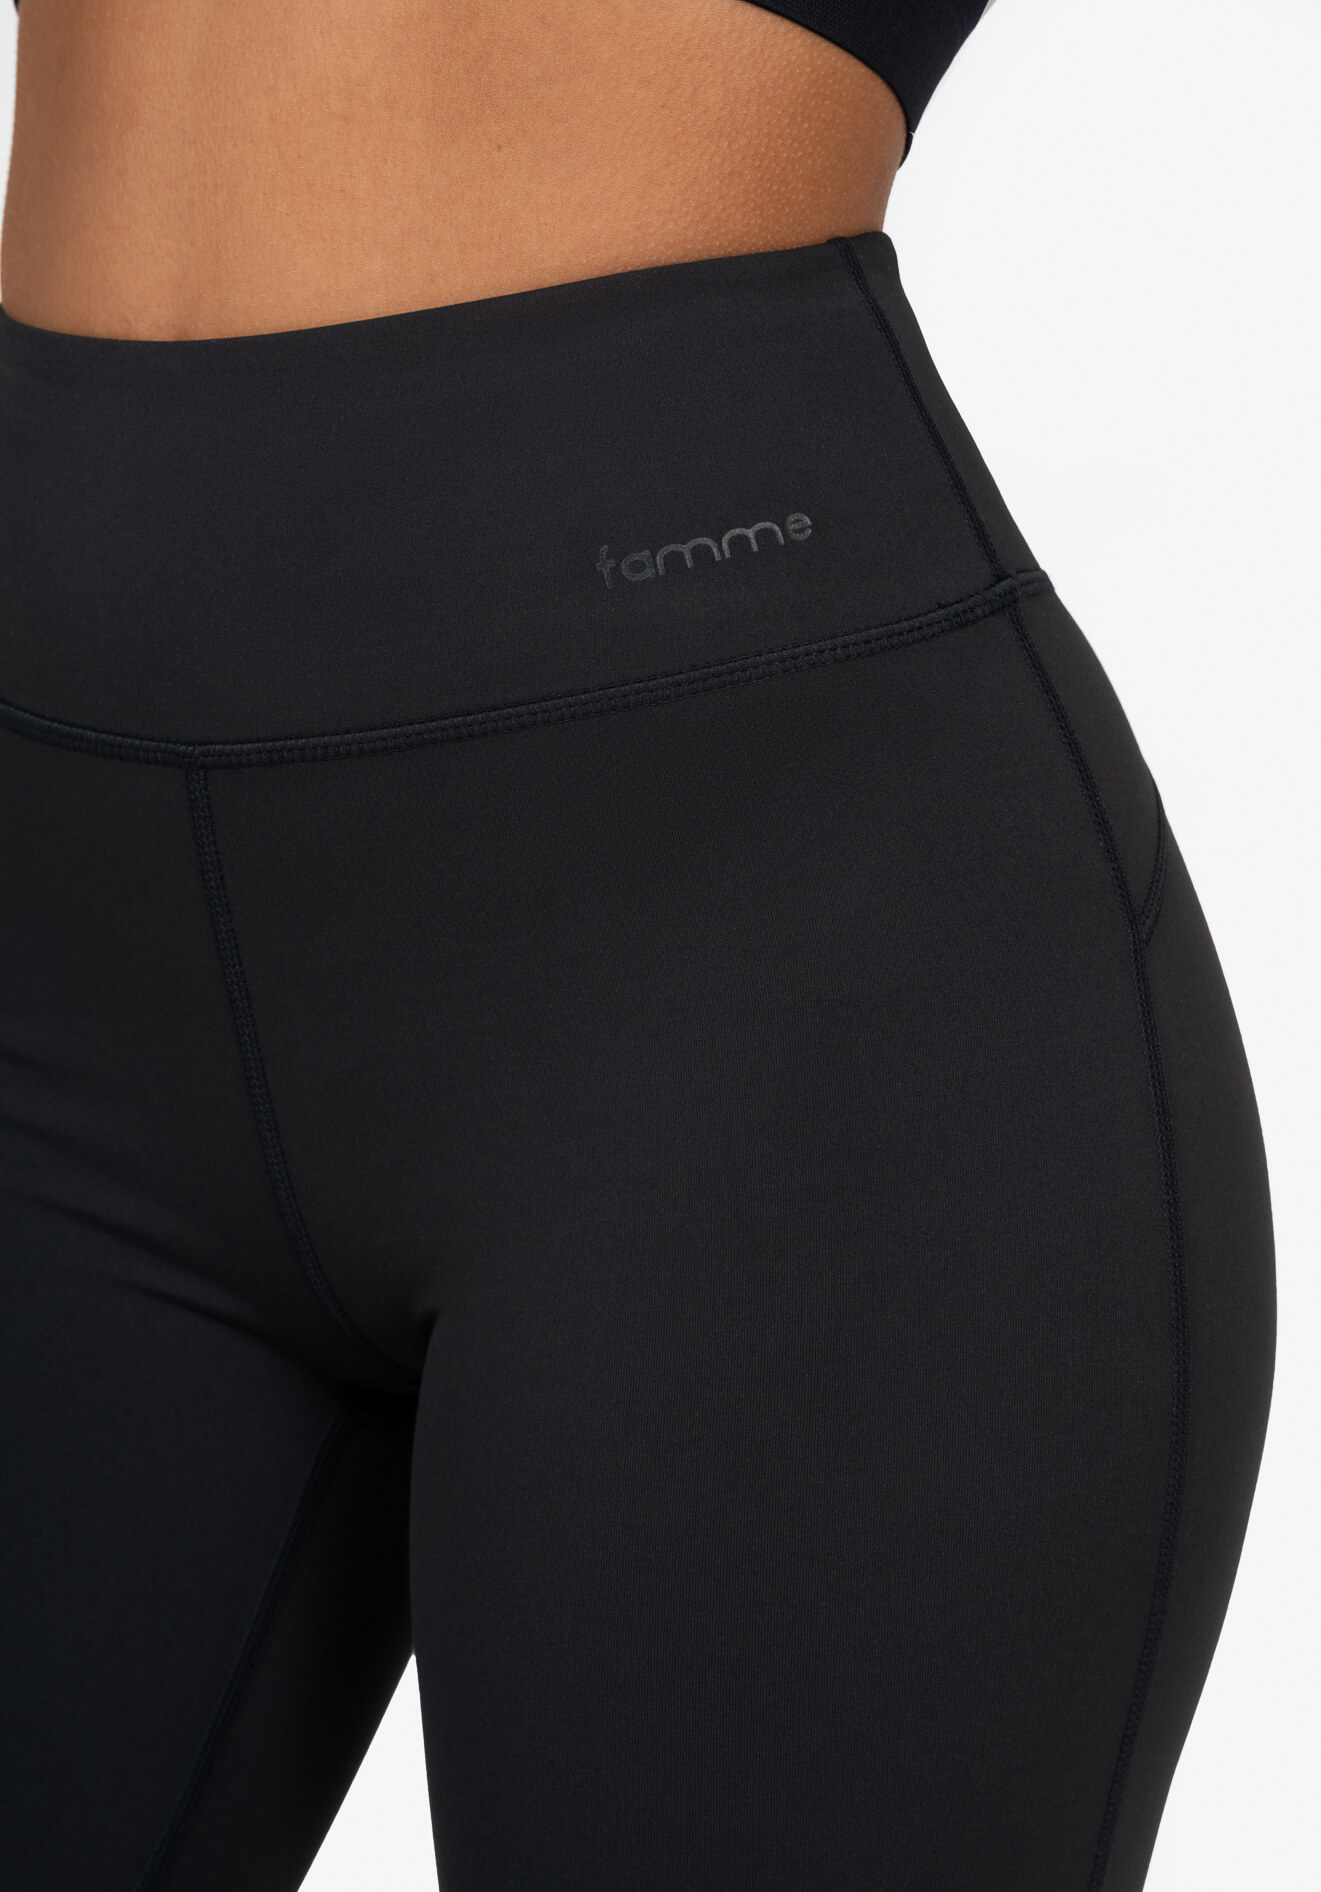 Famme - Yoga Flare Pants - One More Rep